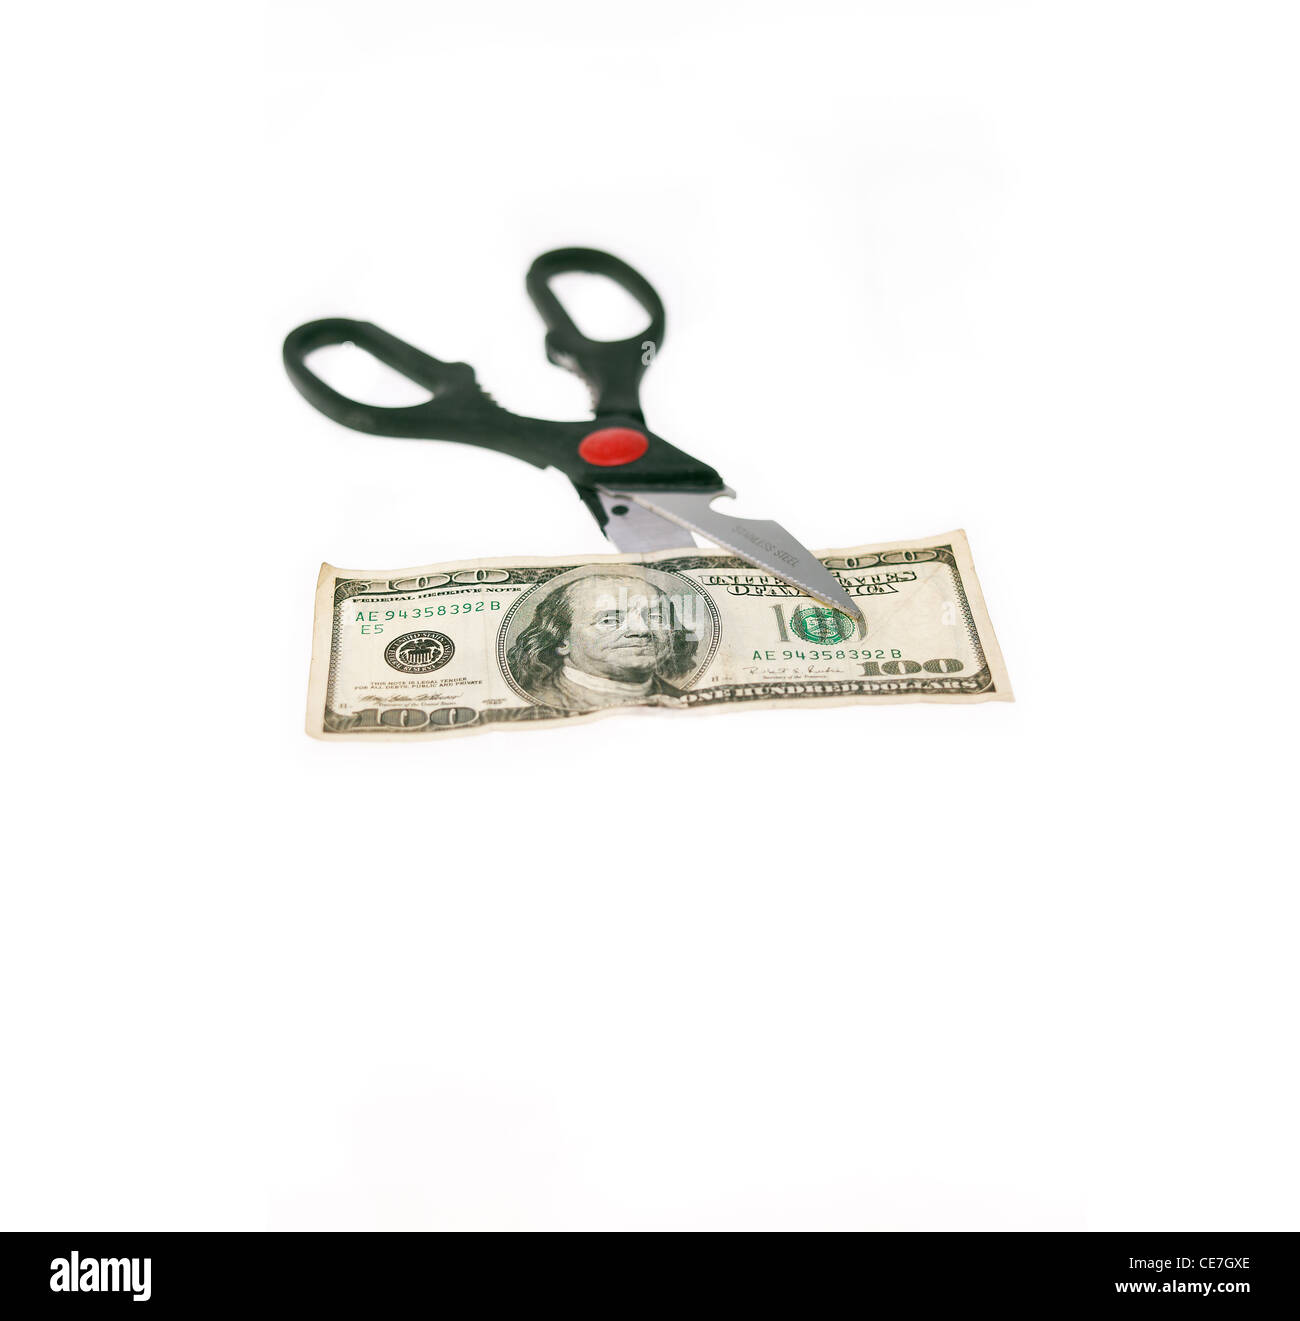 opened stainless scissors cutting us dollar bill closeup isolated on white Stock Photo